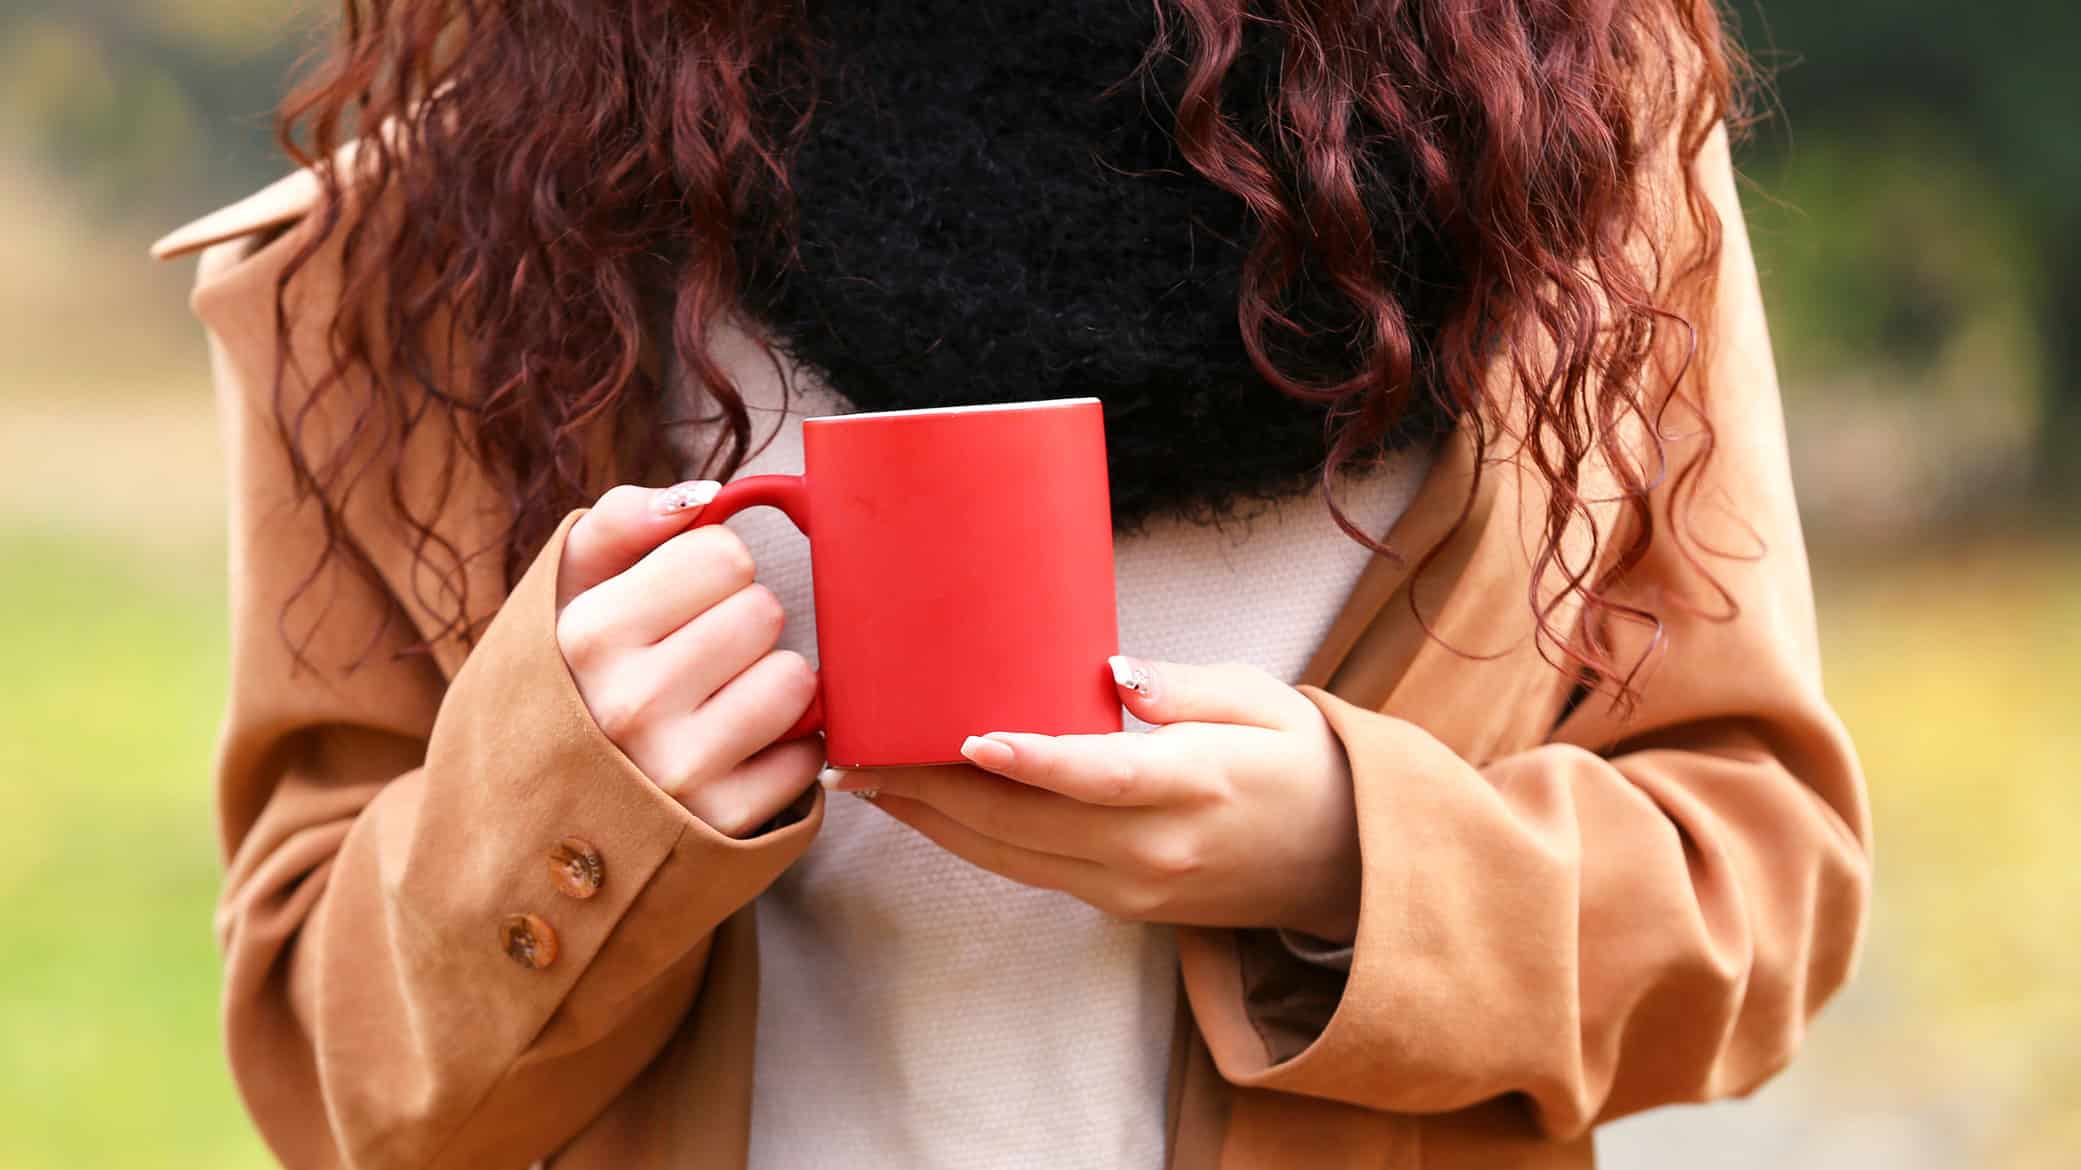 Tea, weather and being on time: analysis of 100 million words reveals what Brits talk about most